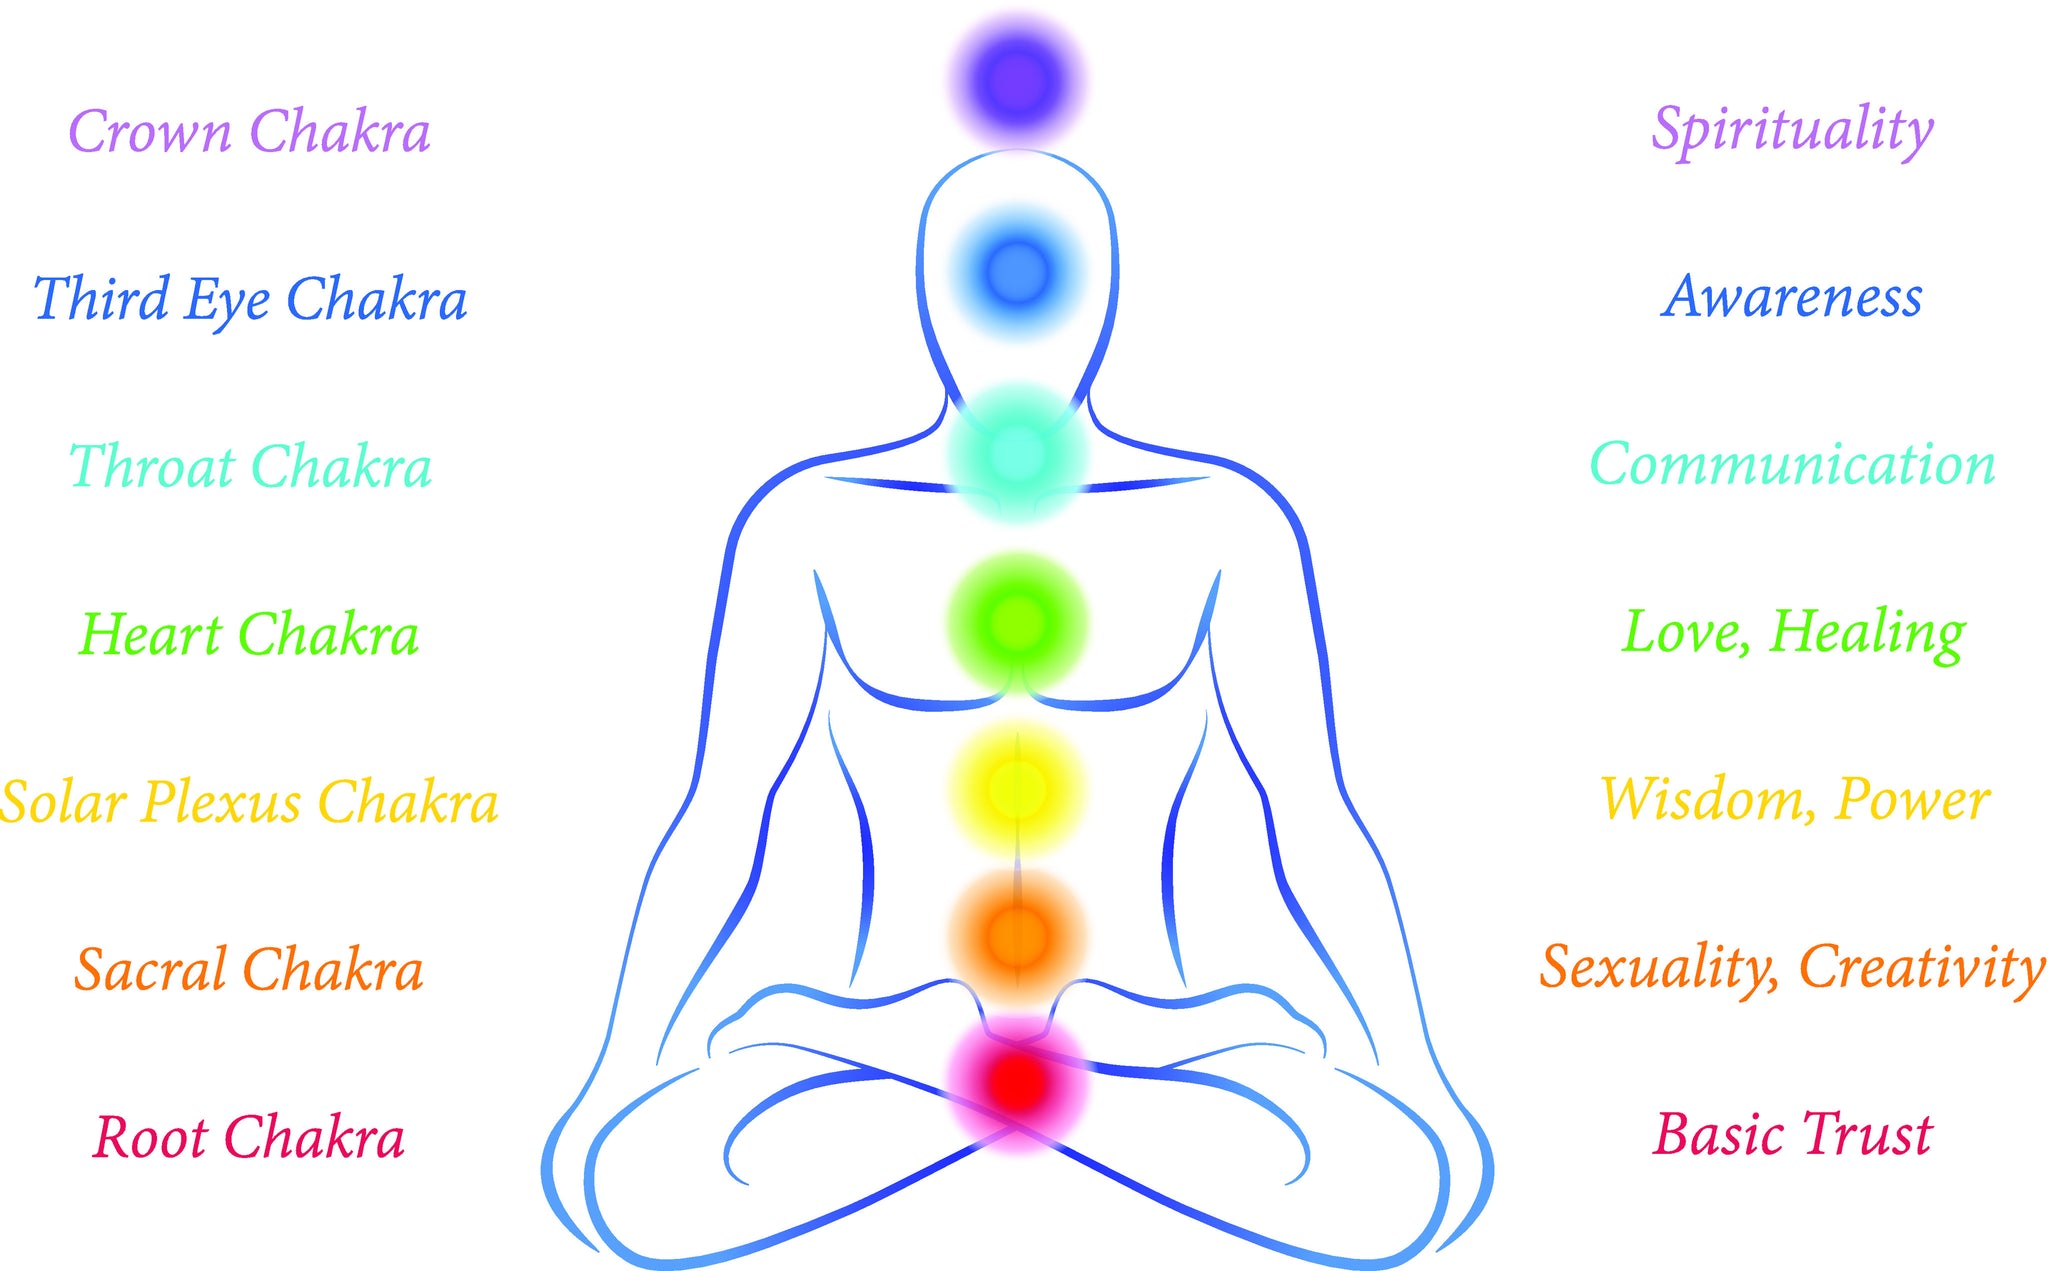 Why Are Chakra Colors So Important And What Do They Mean?